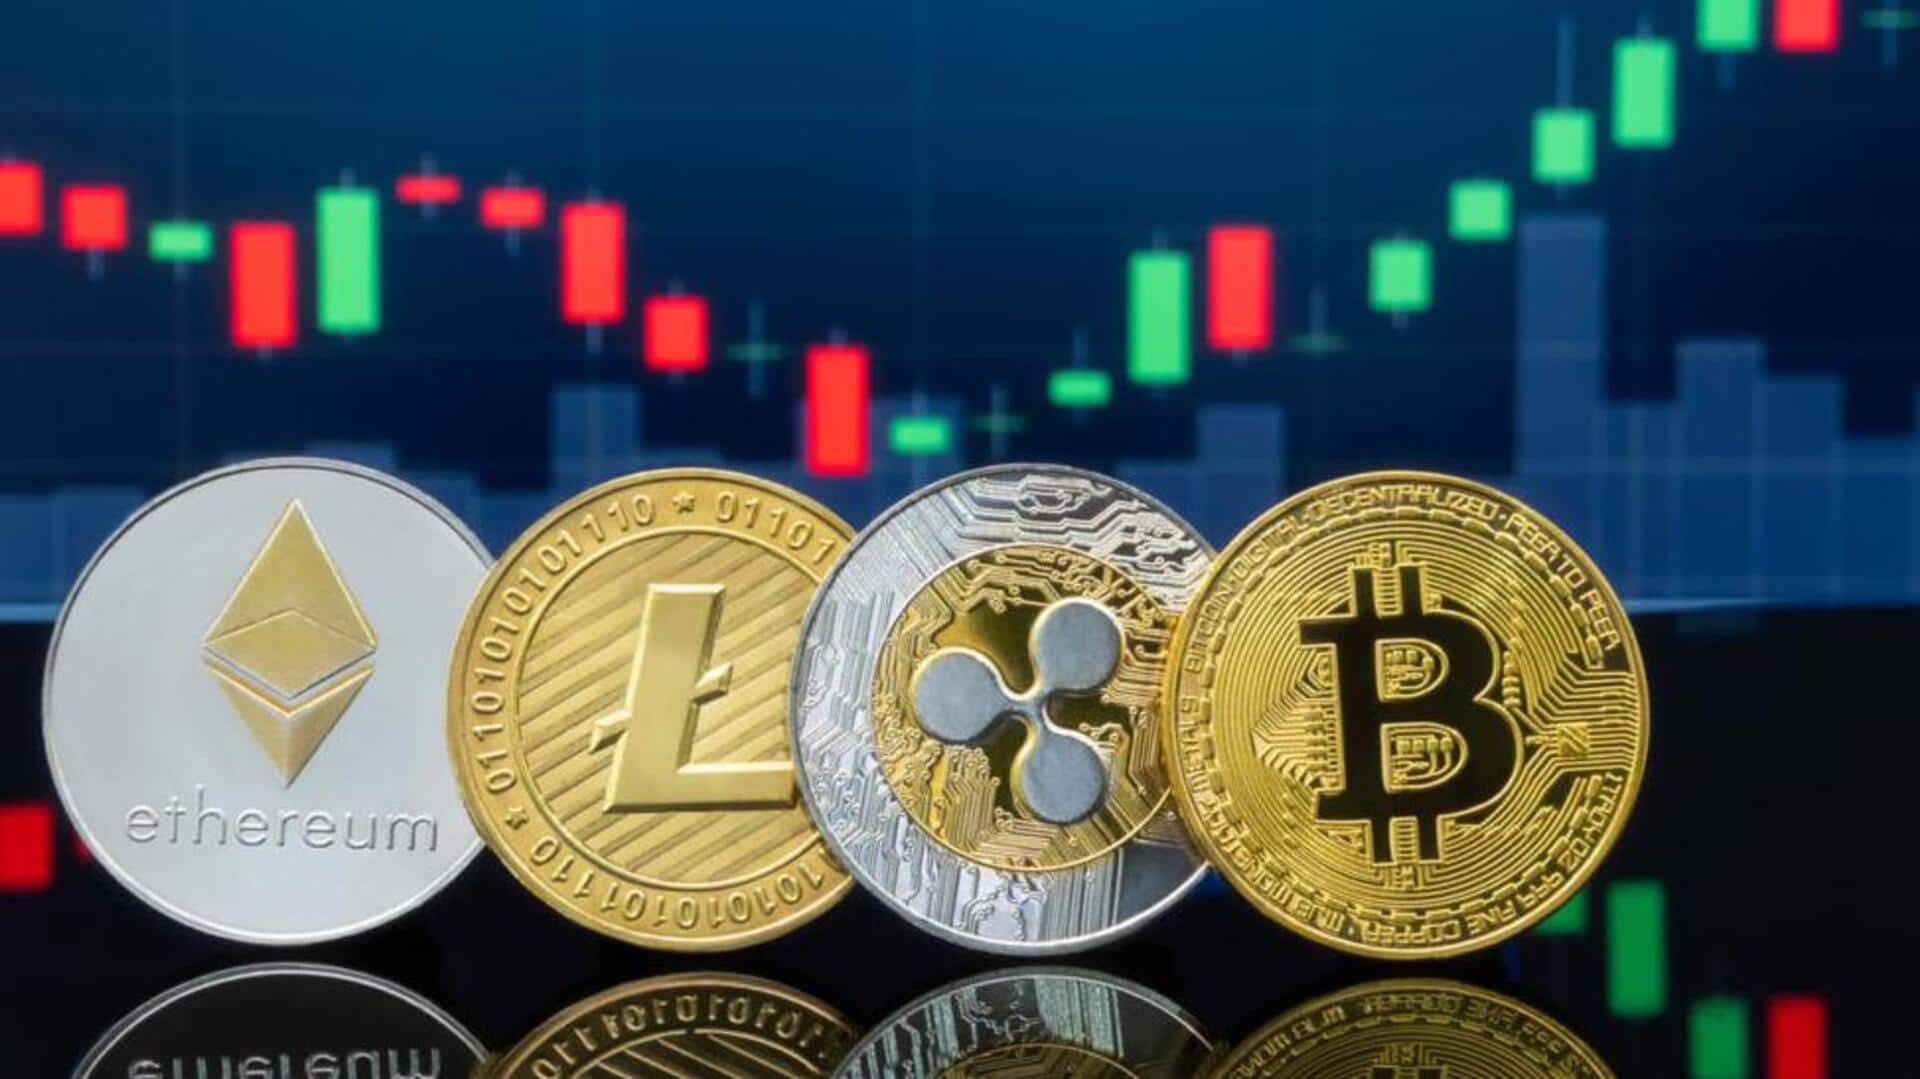 Cryptocurrency prices: Here are rates of Bitcoin, Ethereum, BNB, Solana